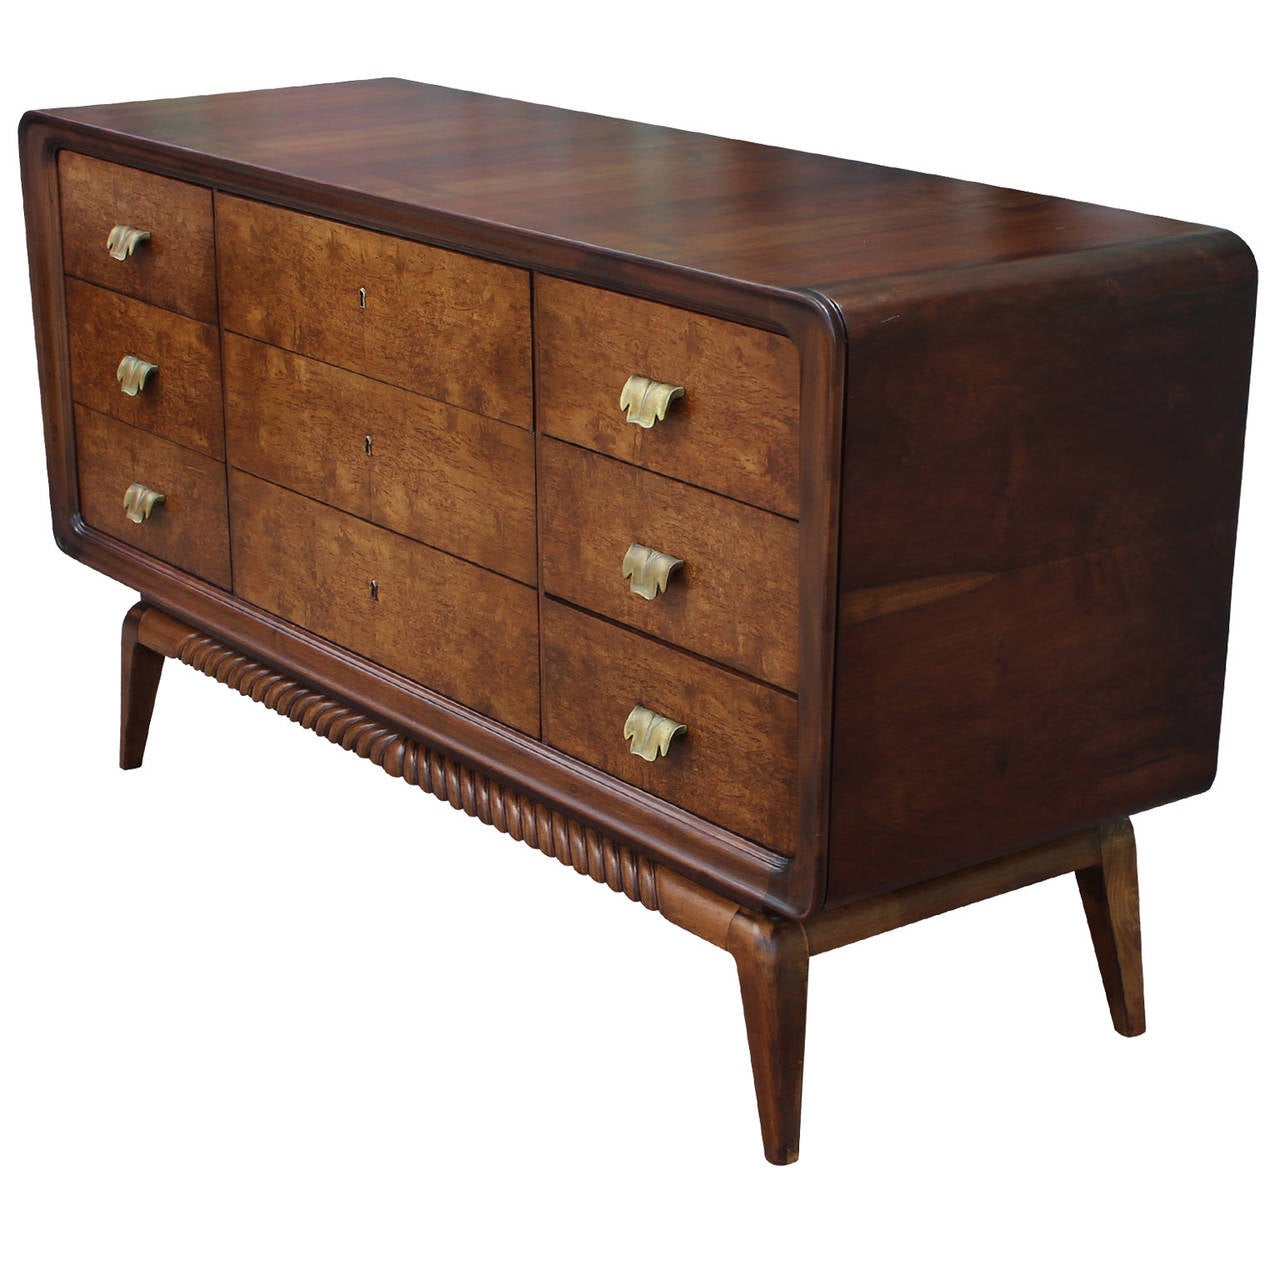 Beautiful Italian Dresser with a two-tone finish. The front Drawers are in a curly grained wood and the shell is Walnut. A  brass key is is used to open the three middle drawers.  Stunning piece from all angles.